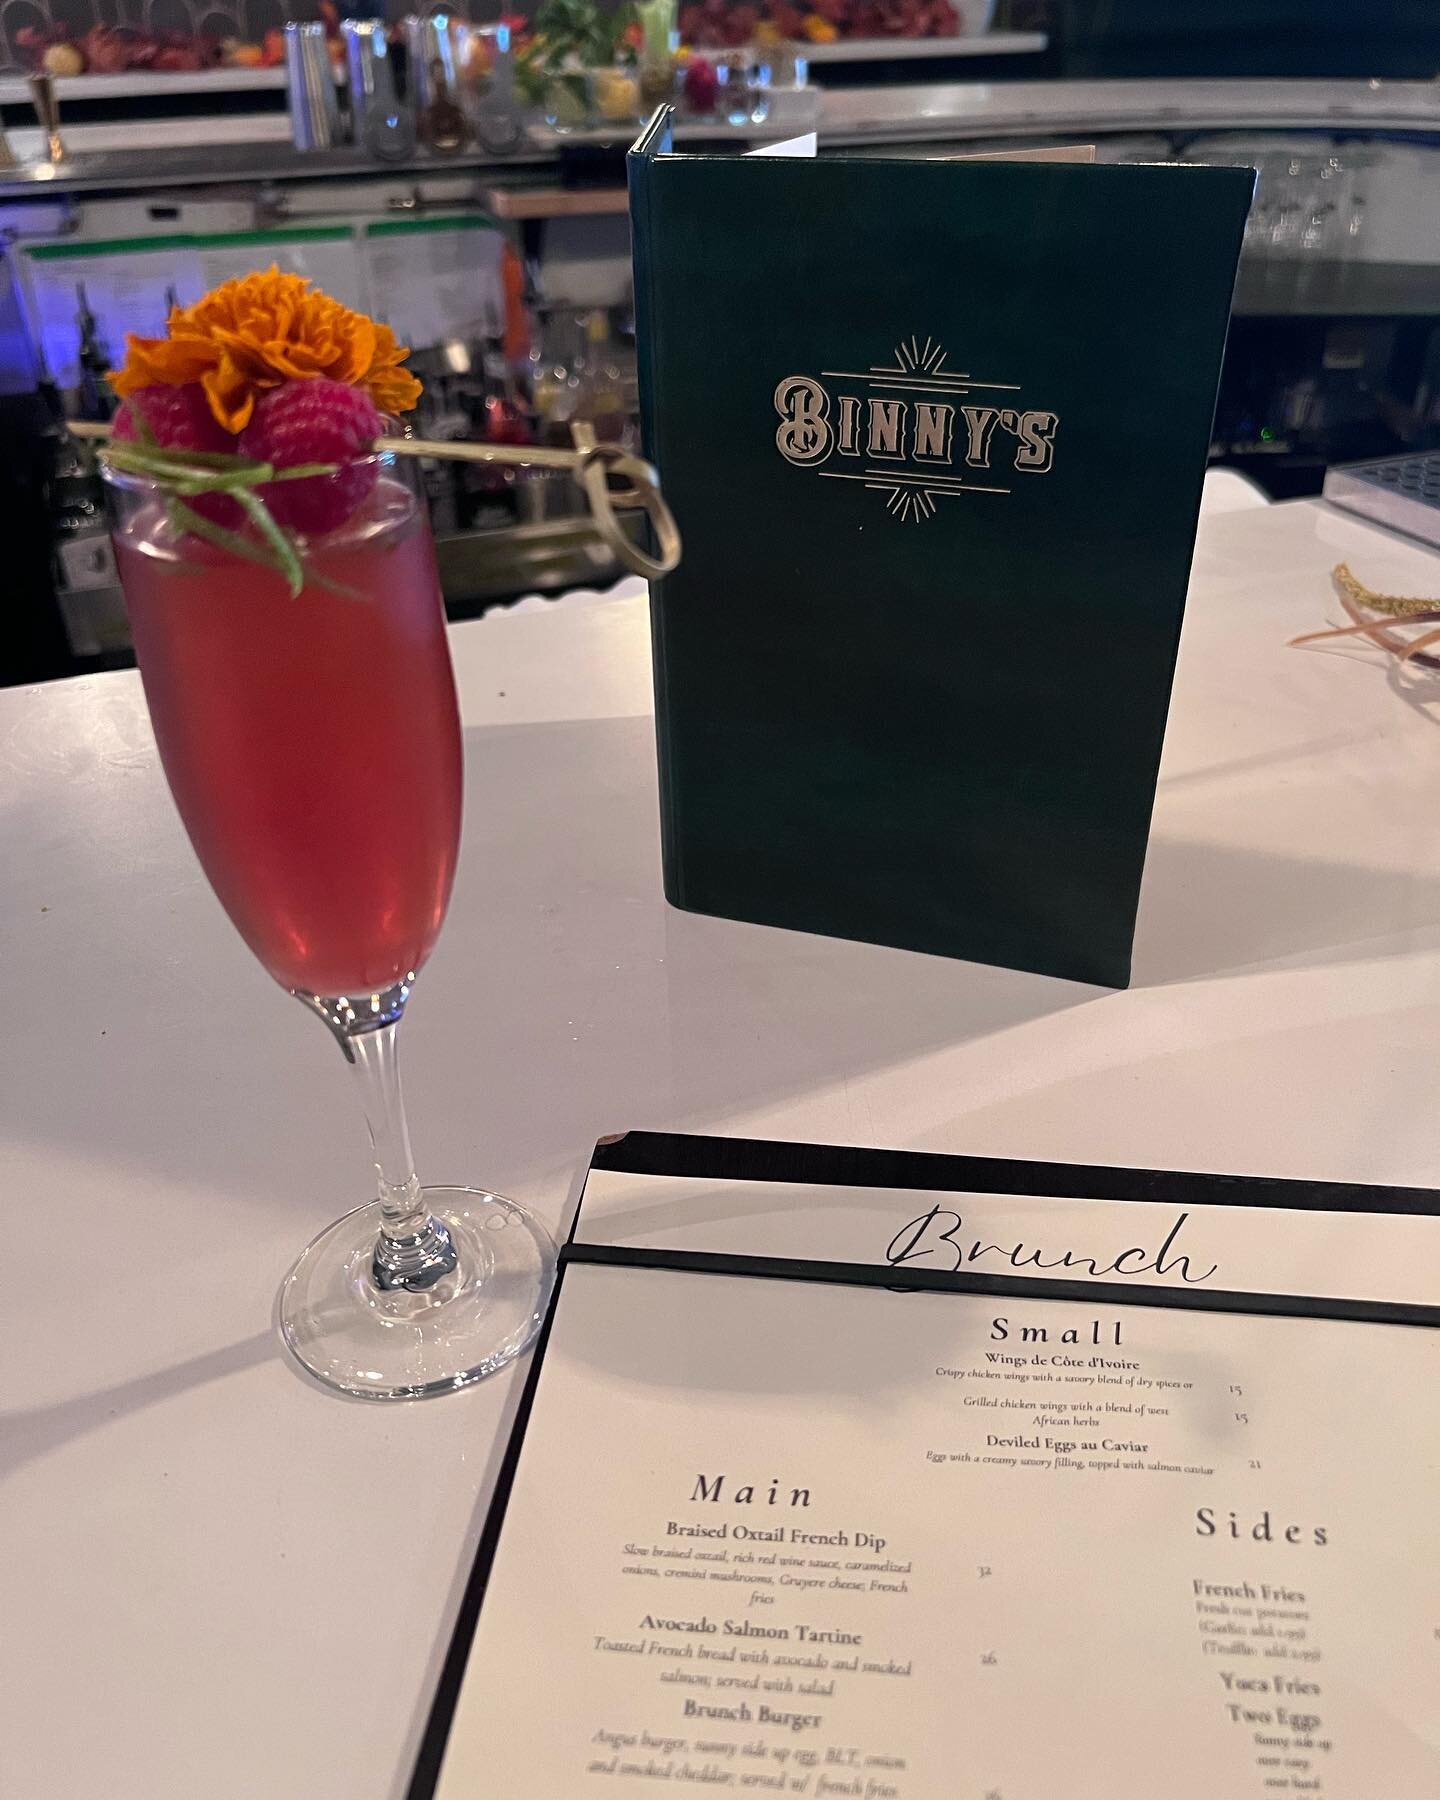 Join us today and tomorrow November 18 &amp; 19 for Brunch at Binny&rsquo;s by @chefyann. Brunch served until 4pm. Dinner and cocktails tonight! Binny&rsquo;s open until midnight. 
#brunch #craftcocktails #oldoakland  #downtownoakland #eastbayeats